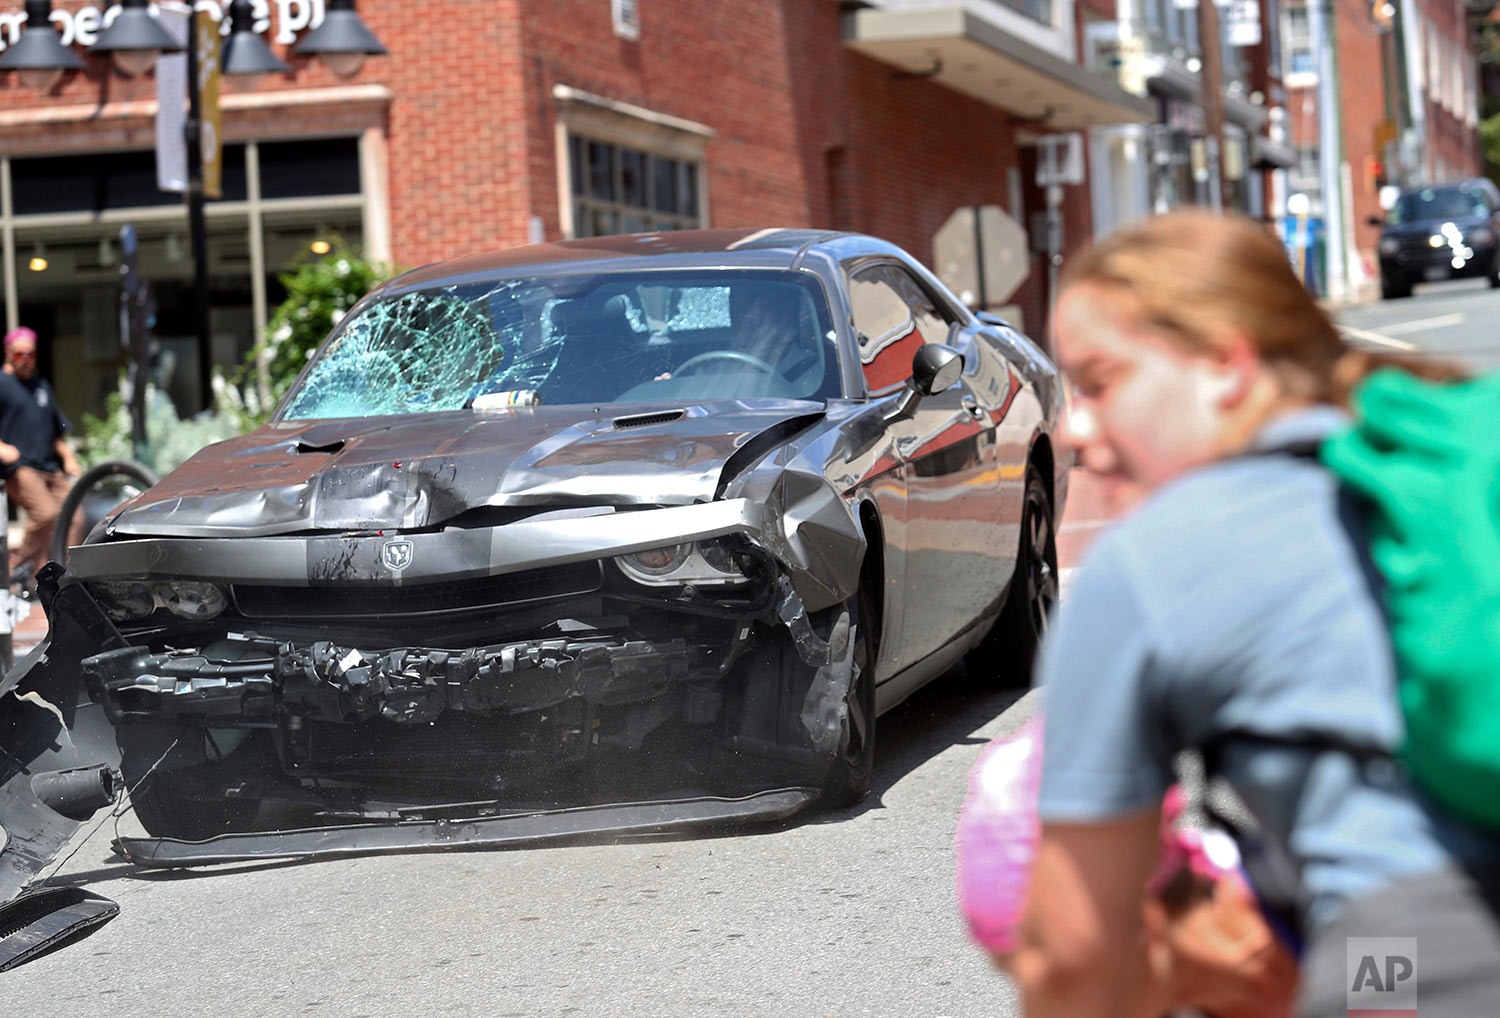  A vehicle reverses after driving into a group of protesters demonstrating against a white nationalist rally in Charlottesville, Va., Saturday, Aug. 12, 2017. (Ryan M. Kelly/The Daily Progress via AP) 